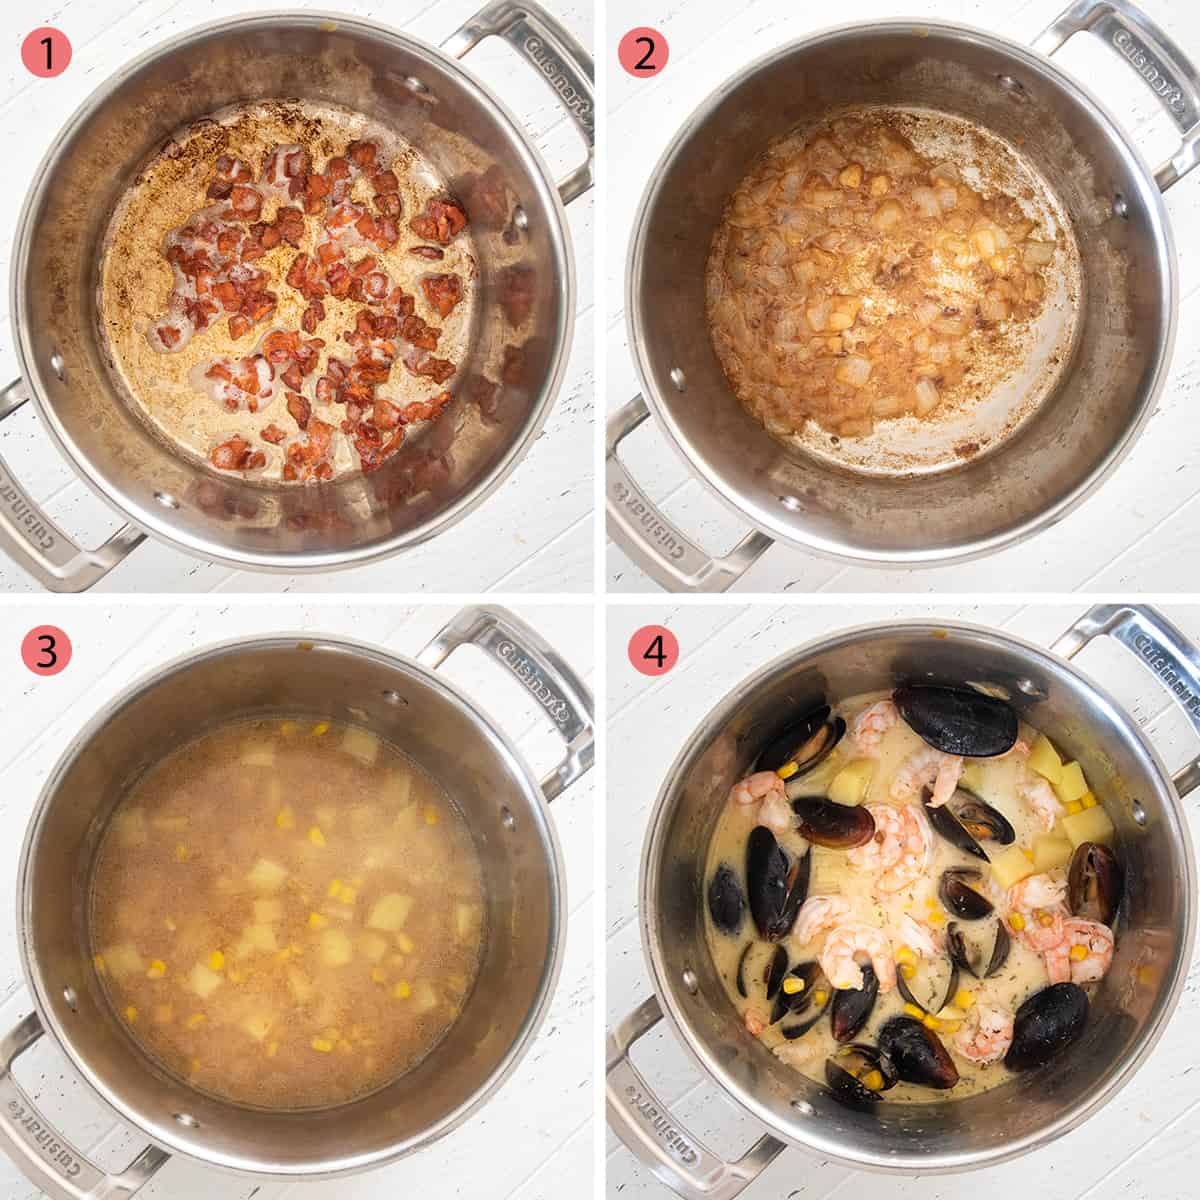 Collage of steps to make chowder including bacon, onions, broth, and seafood.